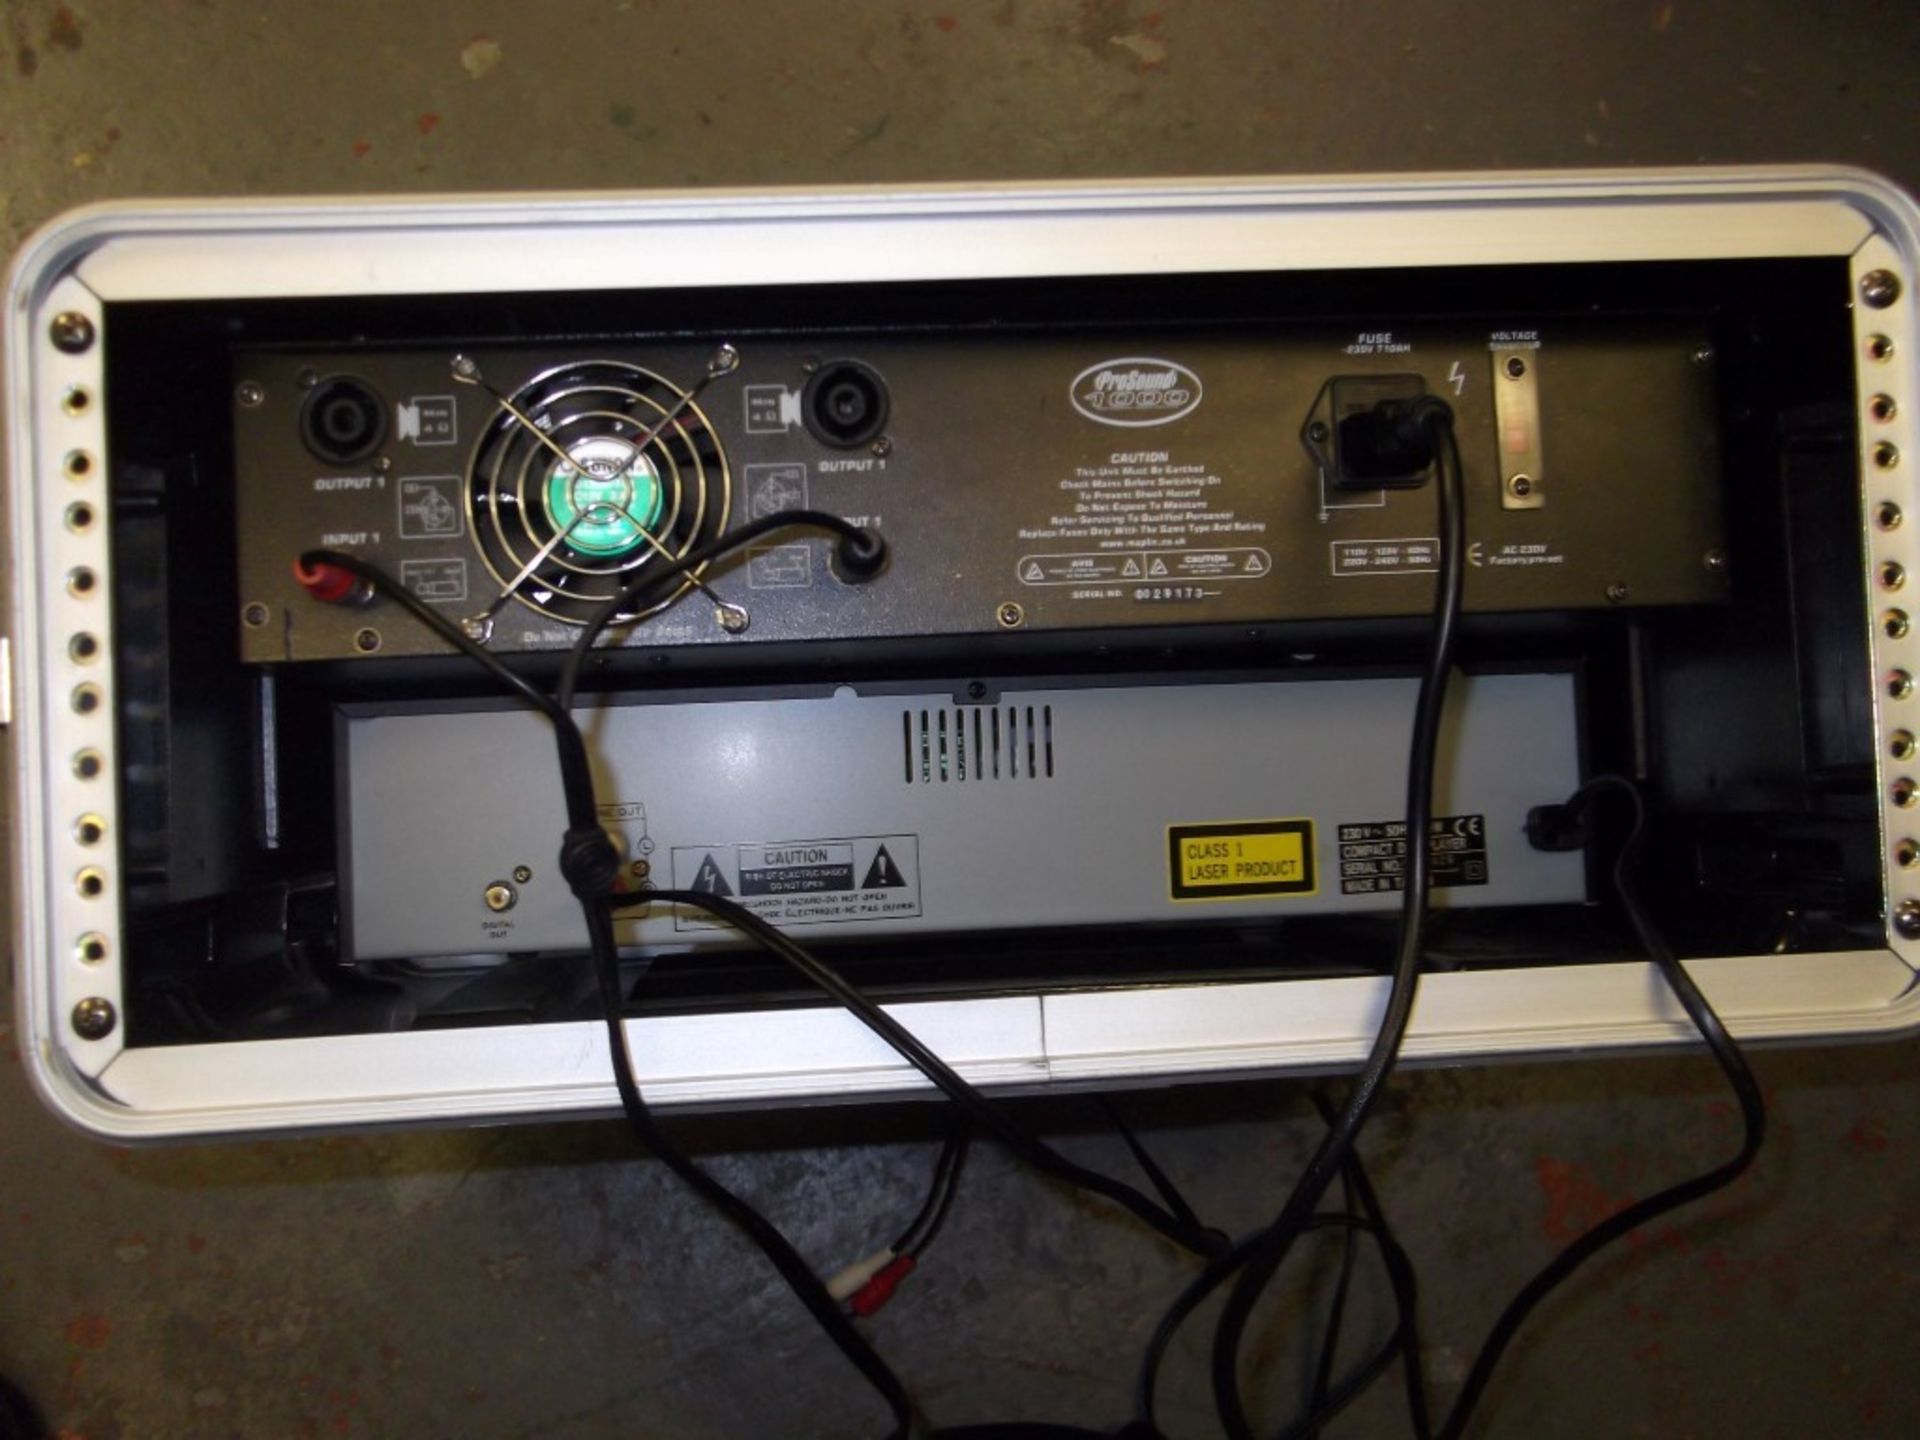 1 x ProSound 1000 - Professional Amplifier With CD Player Built Into Flight Case - Good Working - Image 5 of 11